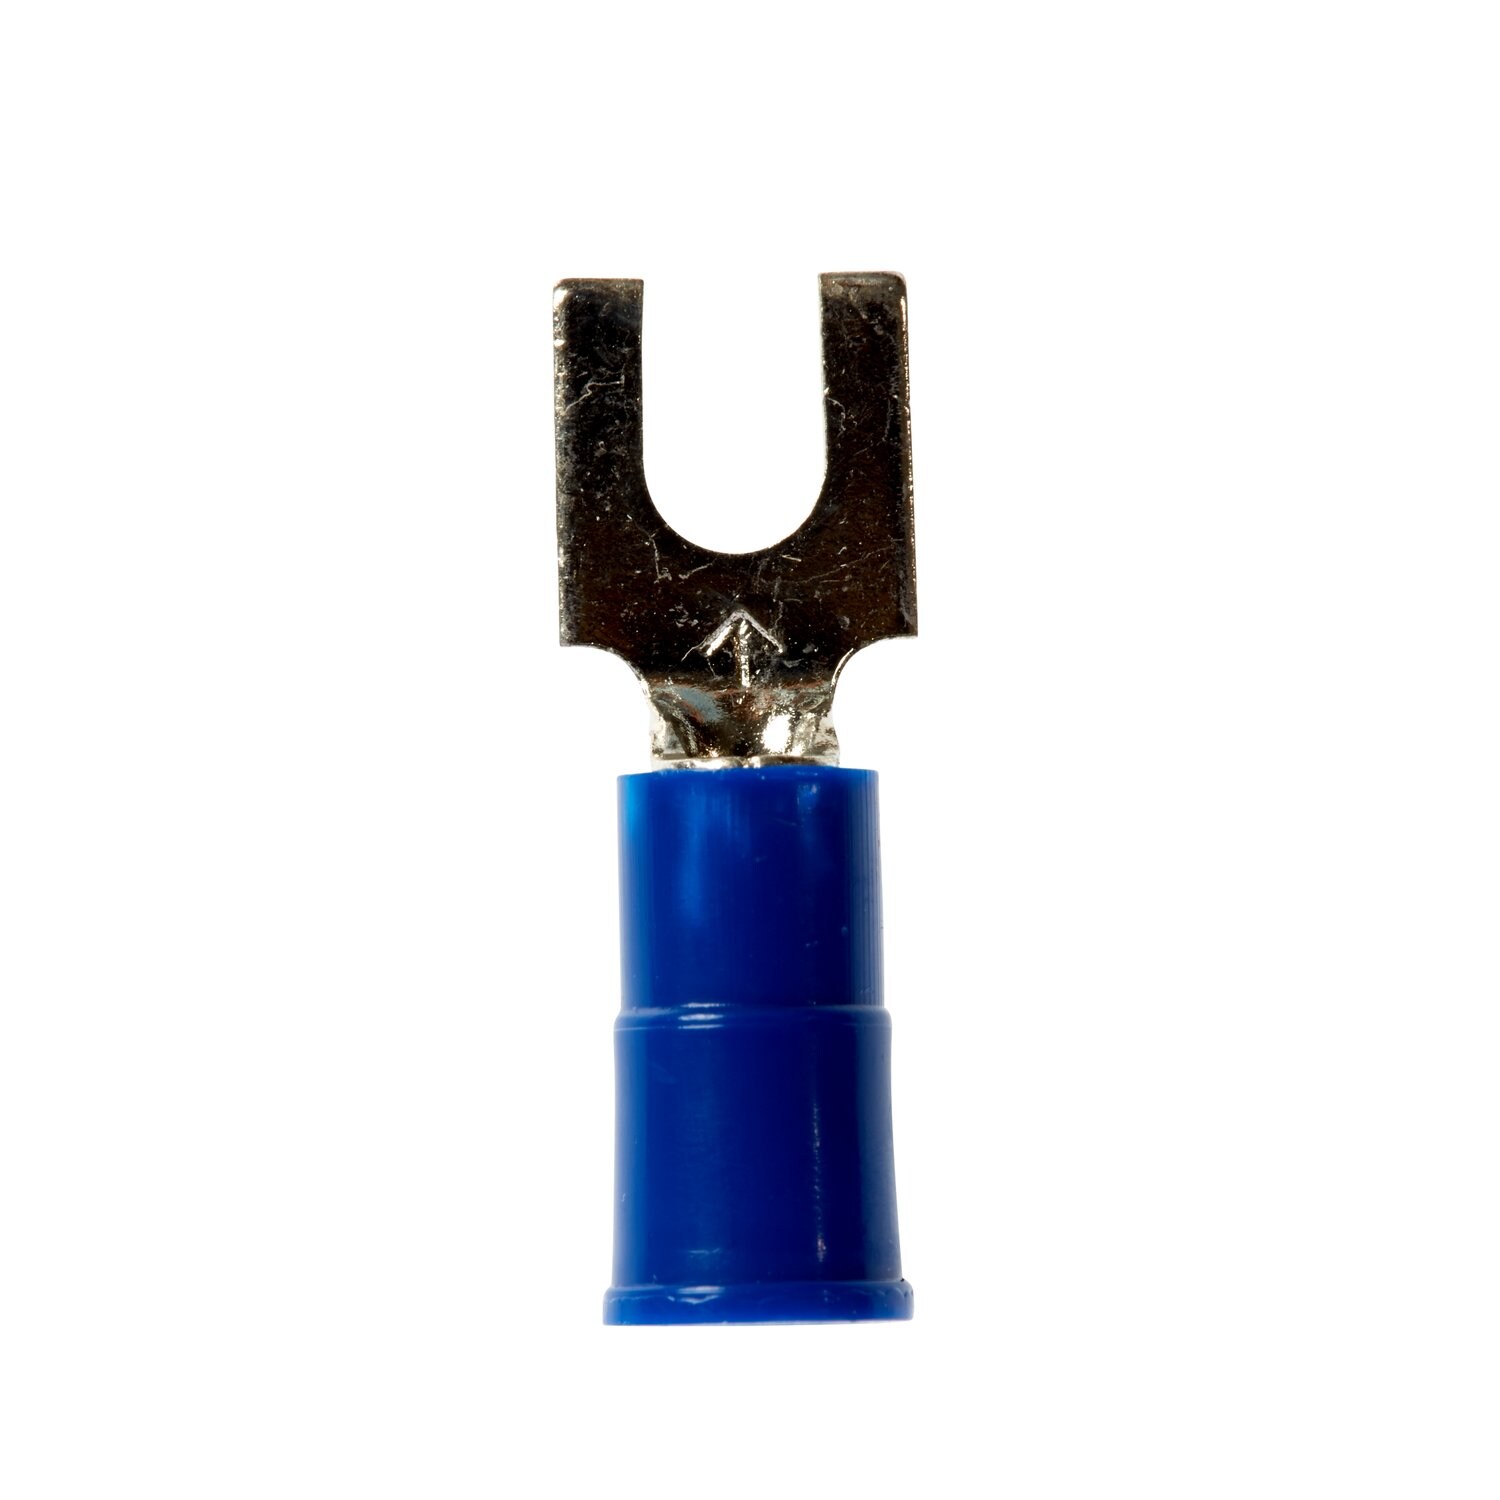 7100164033 - 3M Scotchlok Block Fork, Vinyl Insulated Butted Seam MVU14-6FBK, Stud
Size 6, suitable for use in a terminal block, 1000/Case